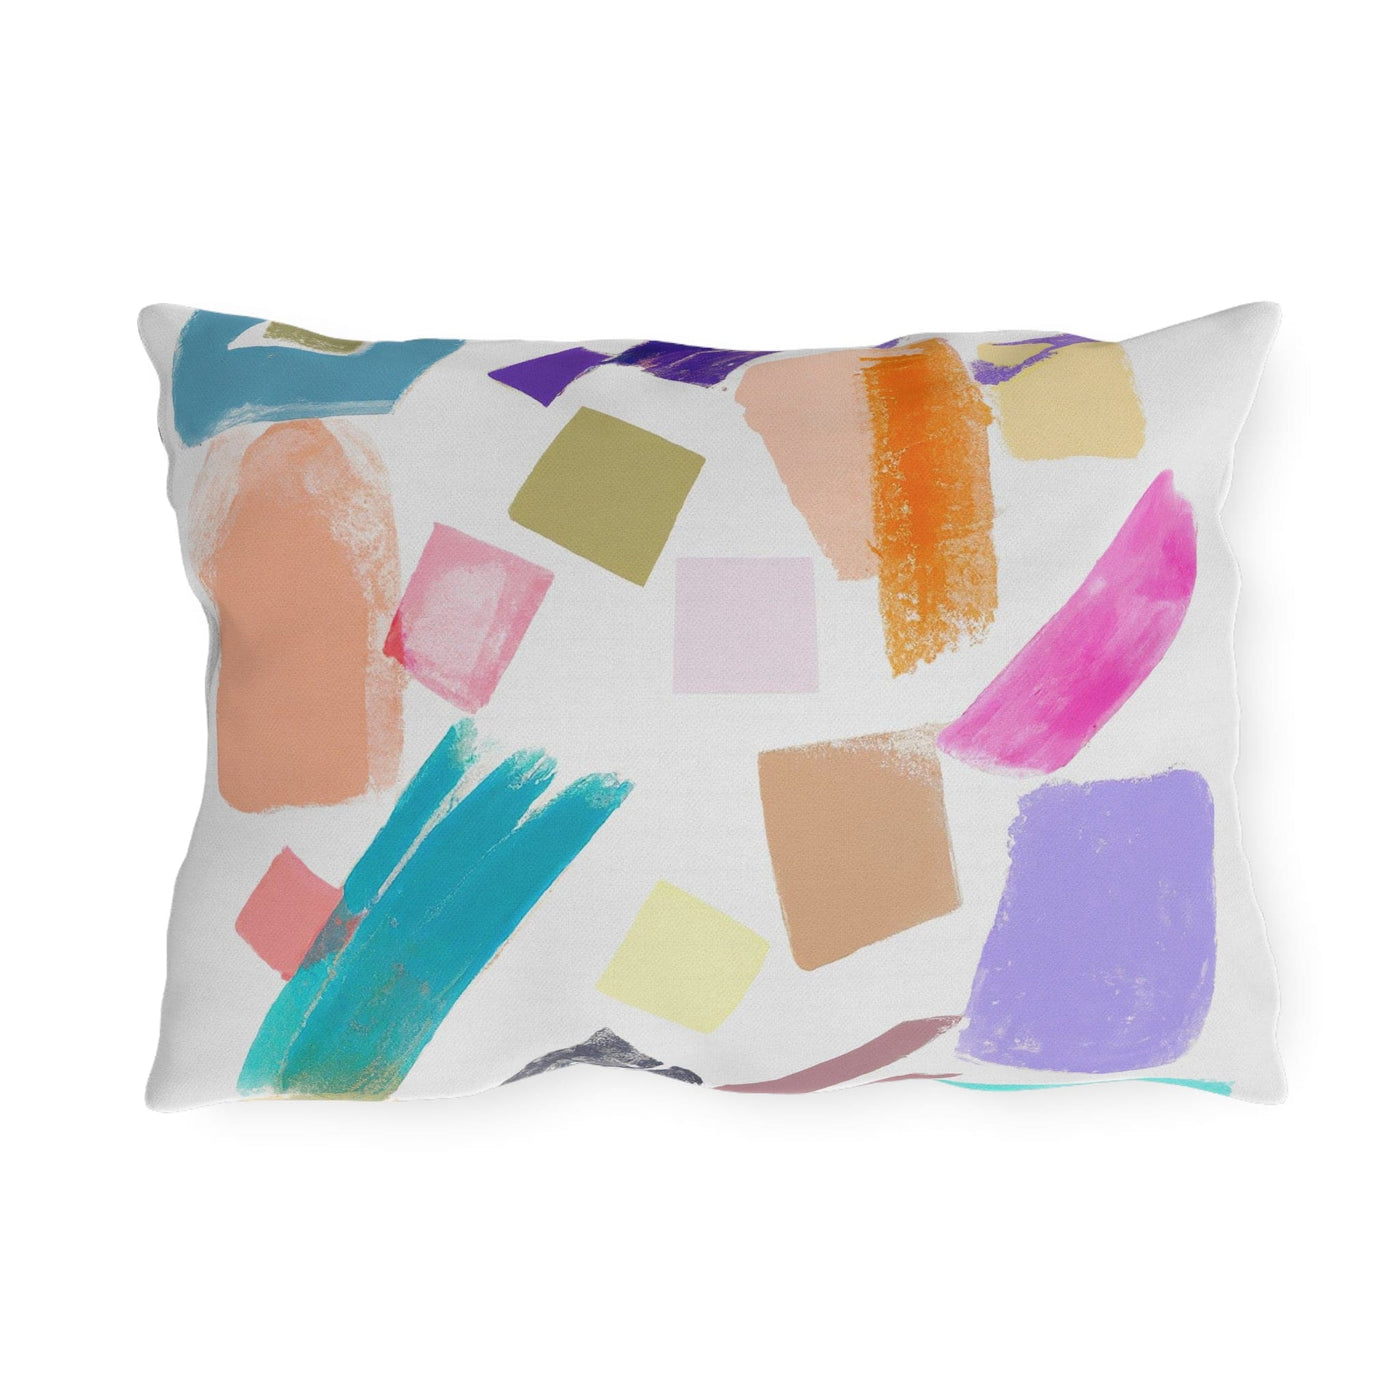 Decorative Outdoor Pillows With Zipper - Set Of 2 Multicolor Pastel Geometric